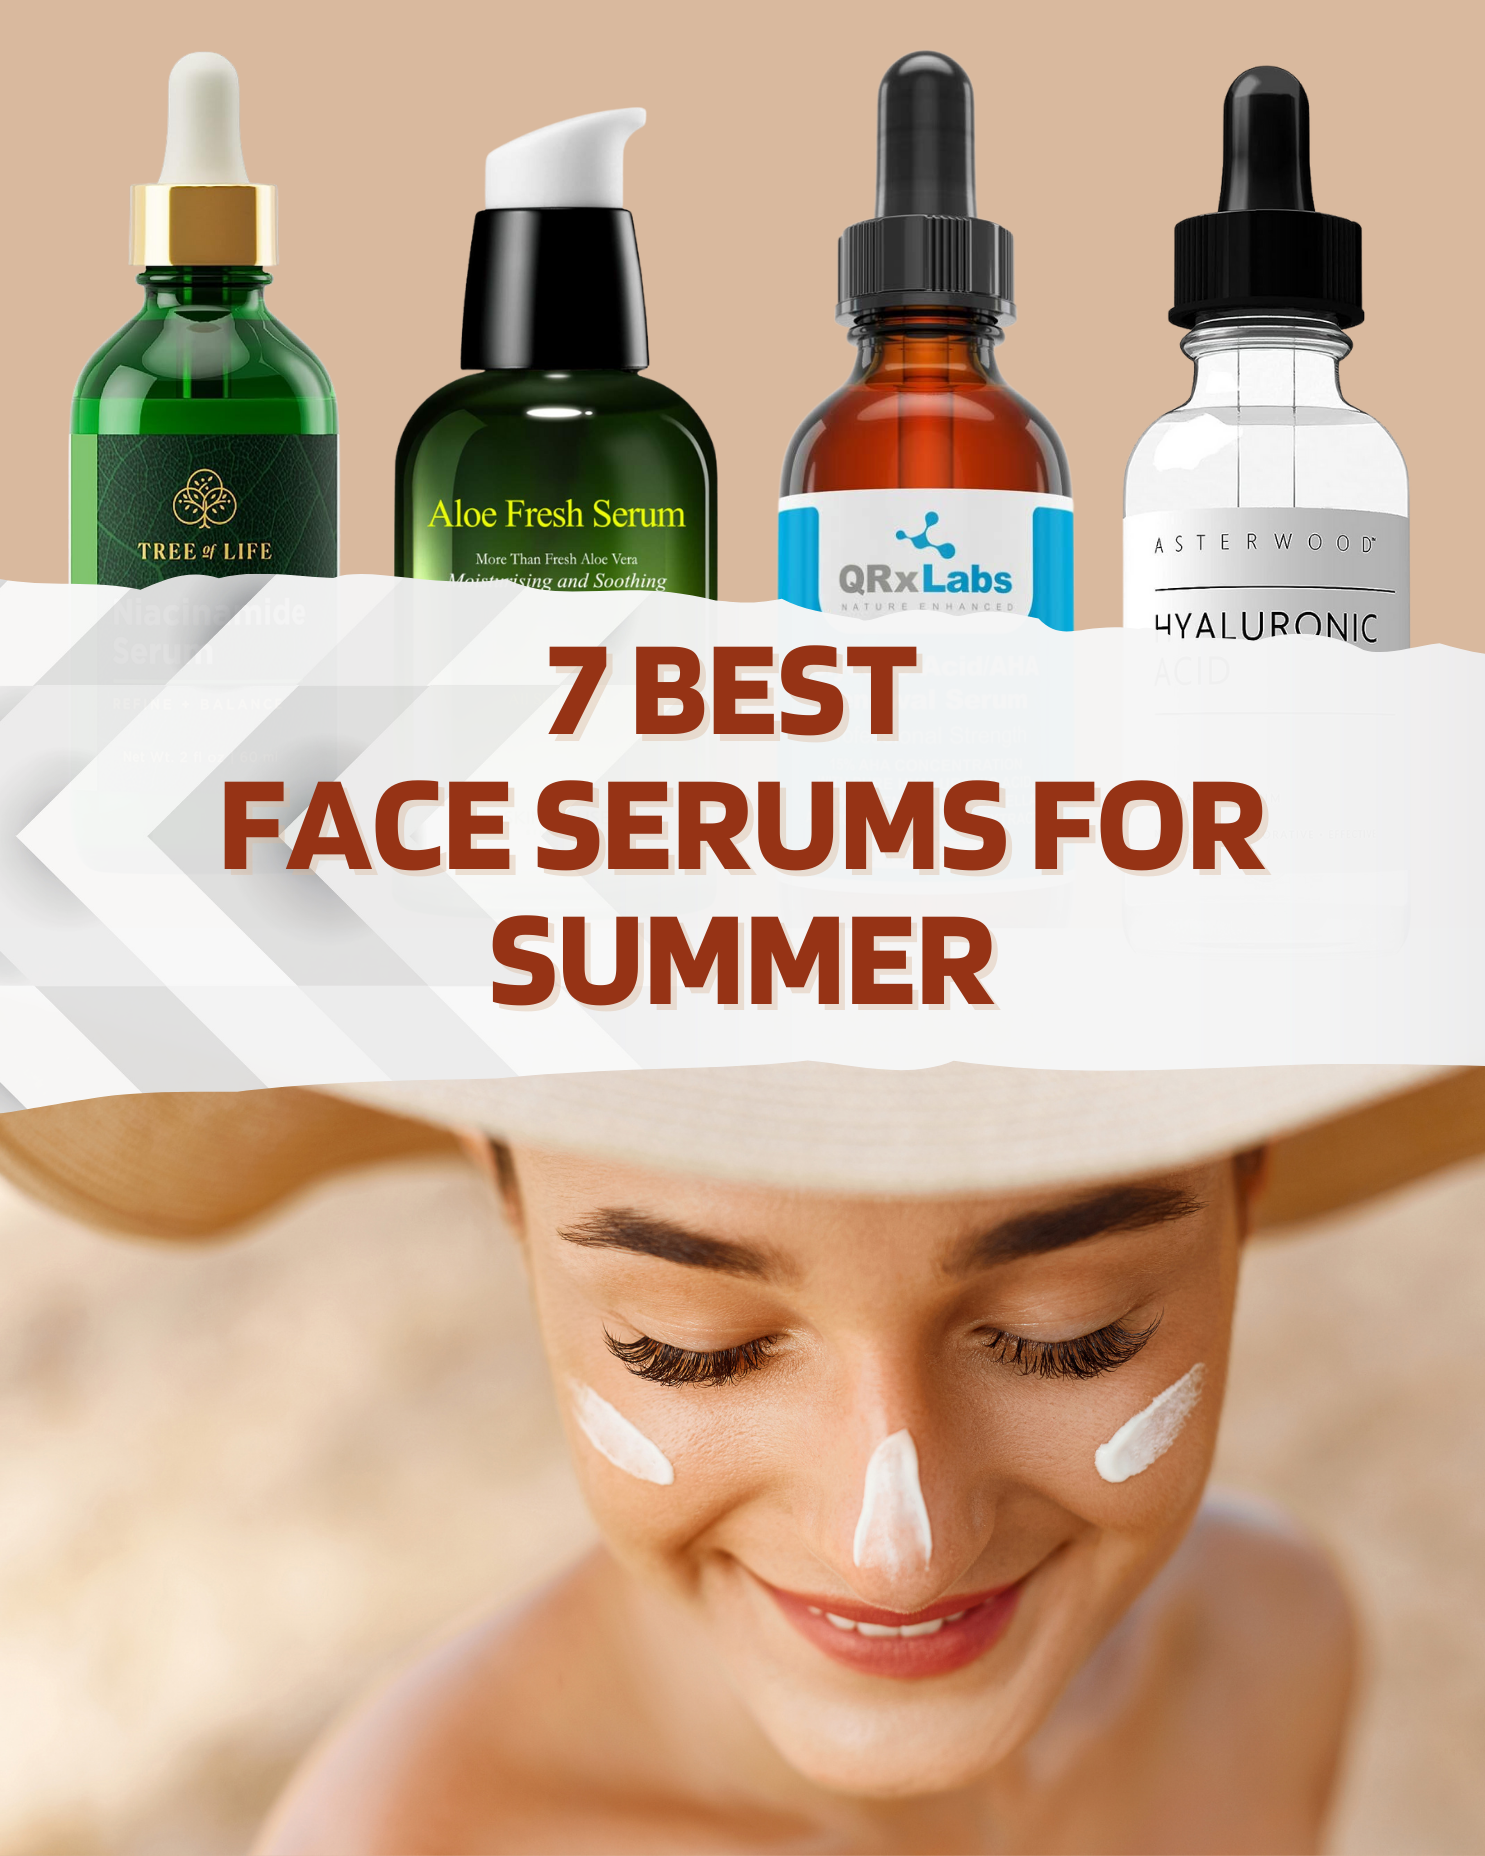 5 Best Sunblock Products for Eczema: Why We Love Them